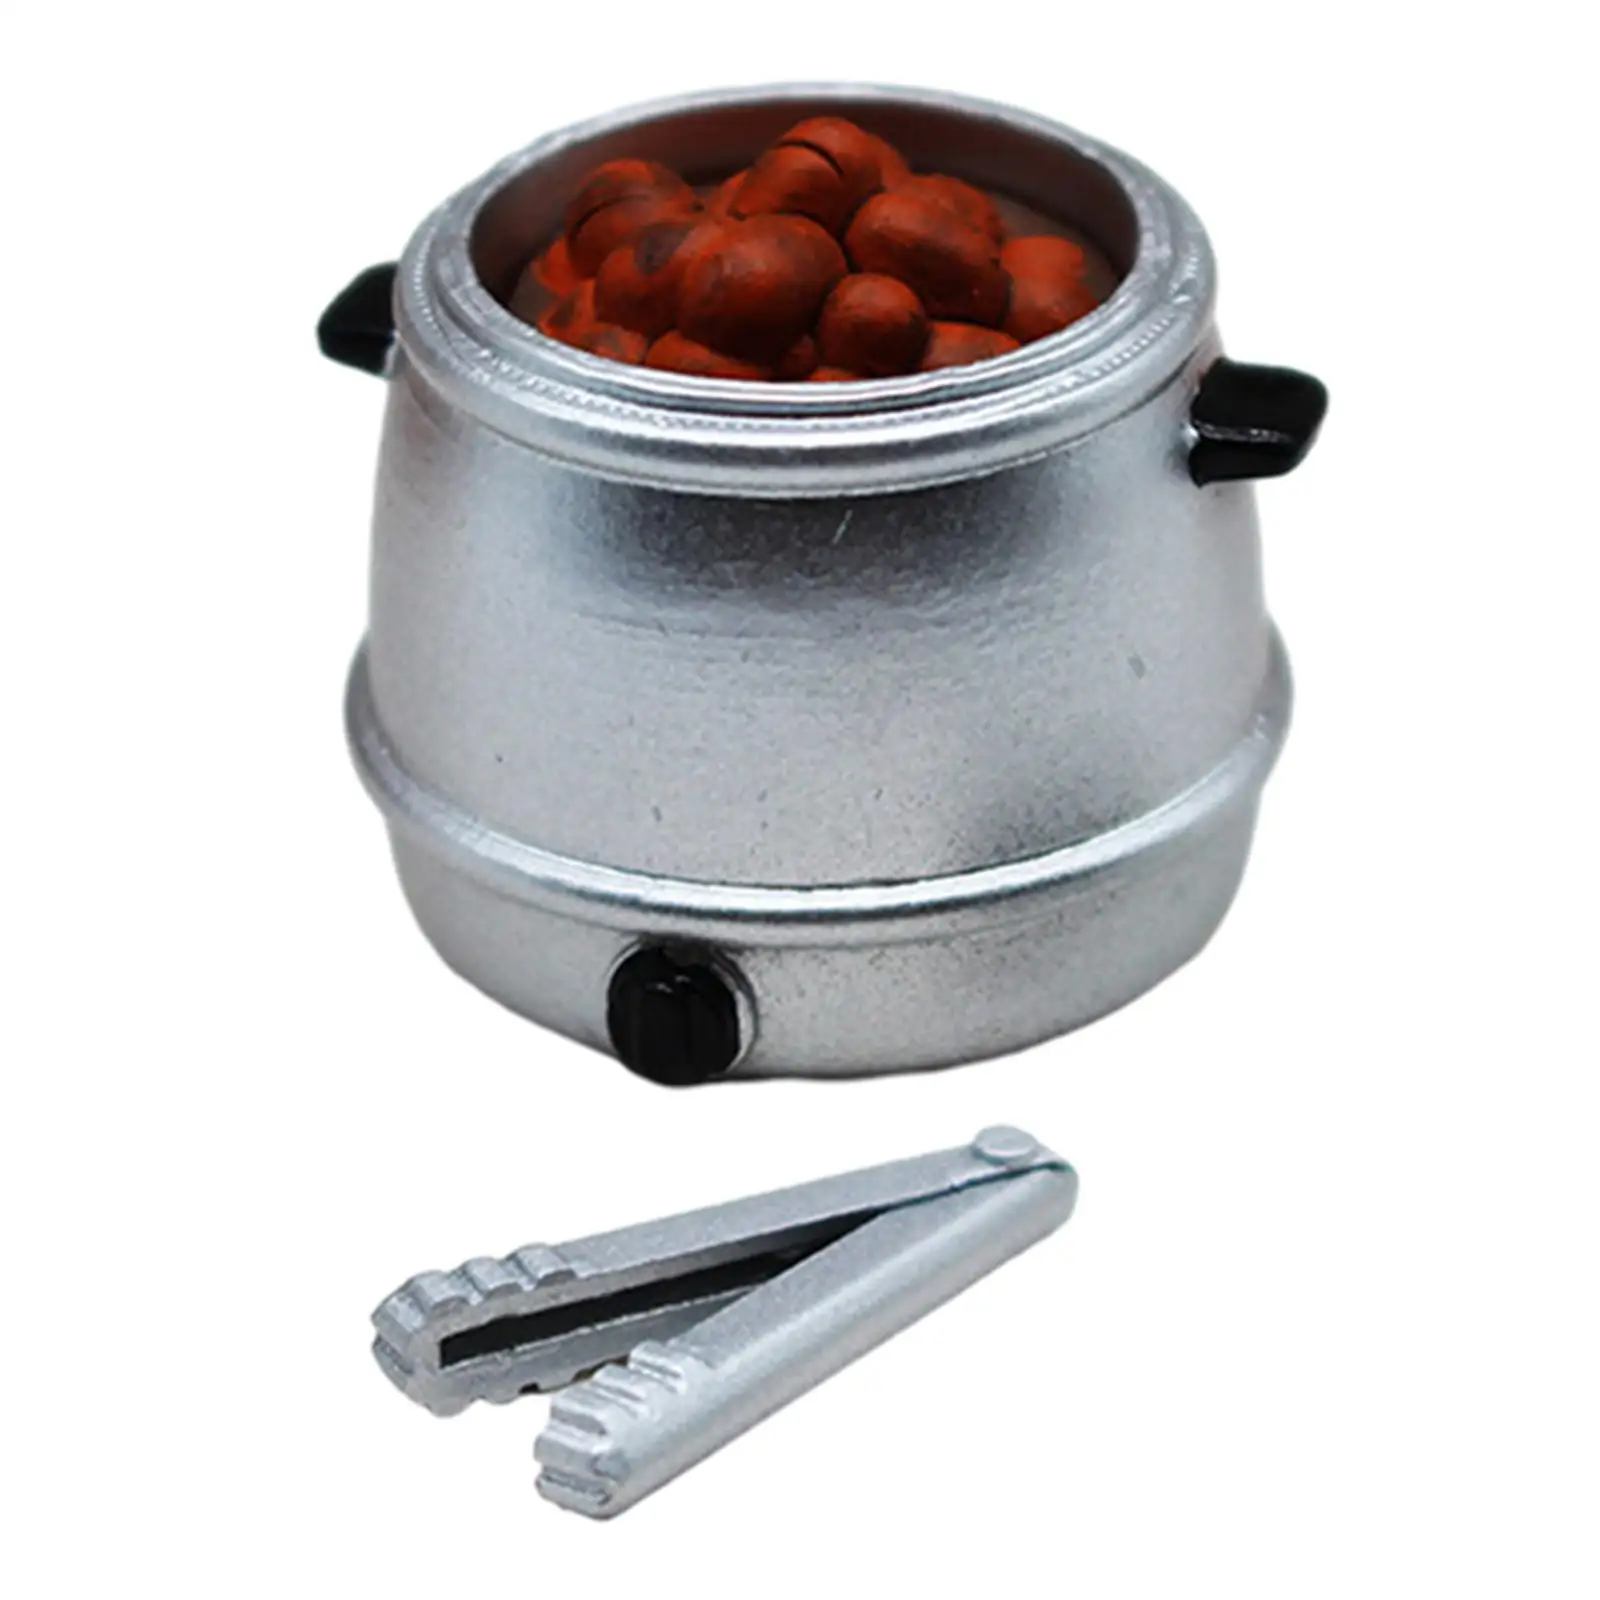 

Dollhouse Soup Pot Doll Accessories Simulation Kitchenware Model Miniature Furniture, Cooking Pot for Dollhouse Tabletop